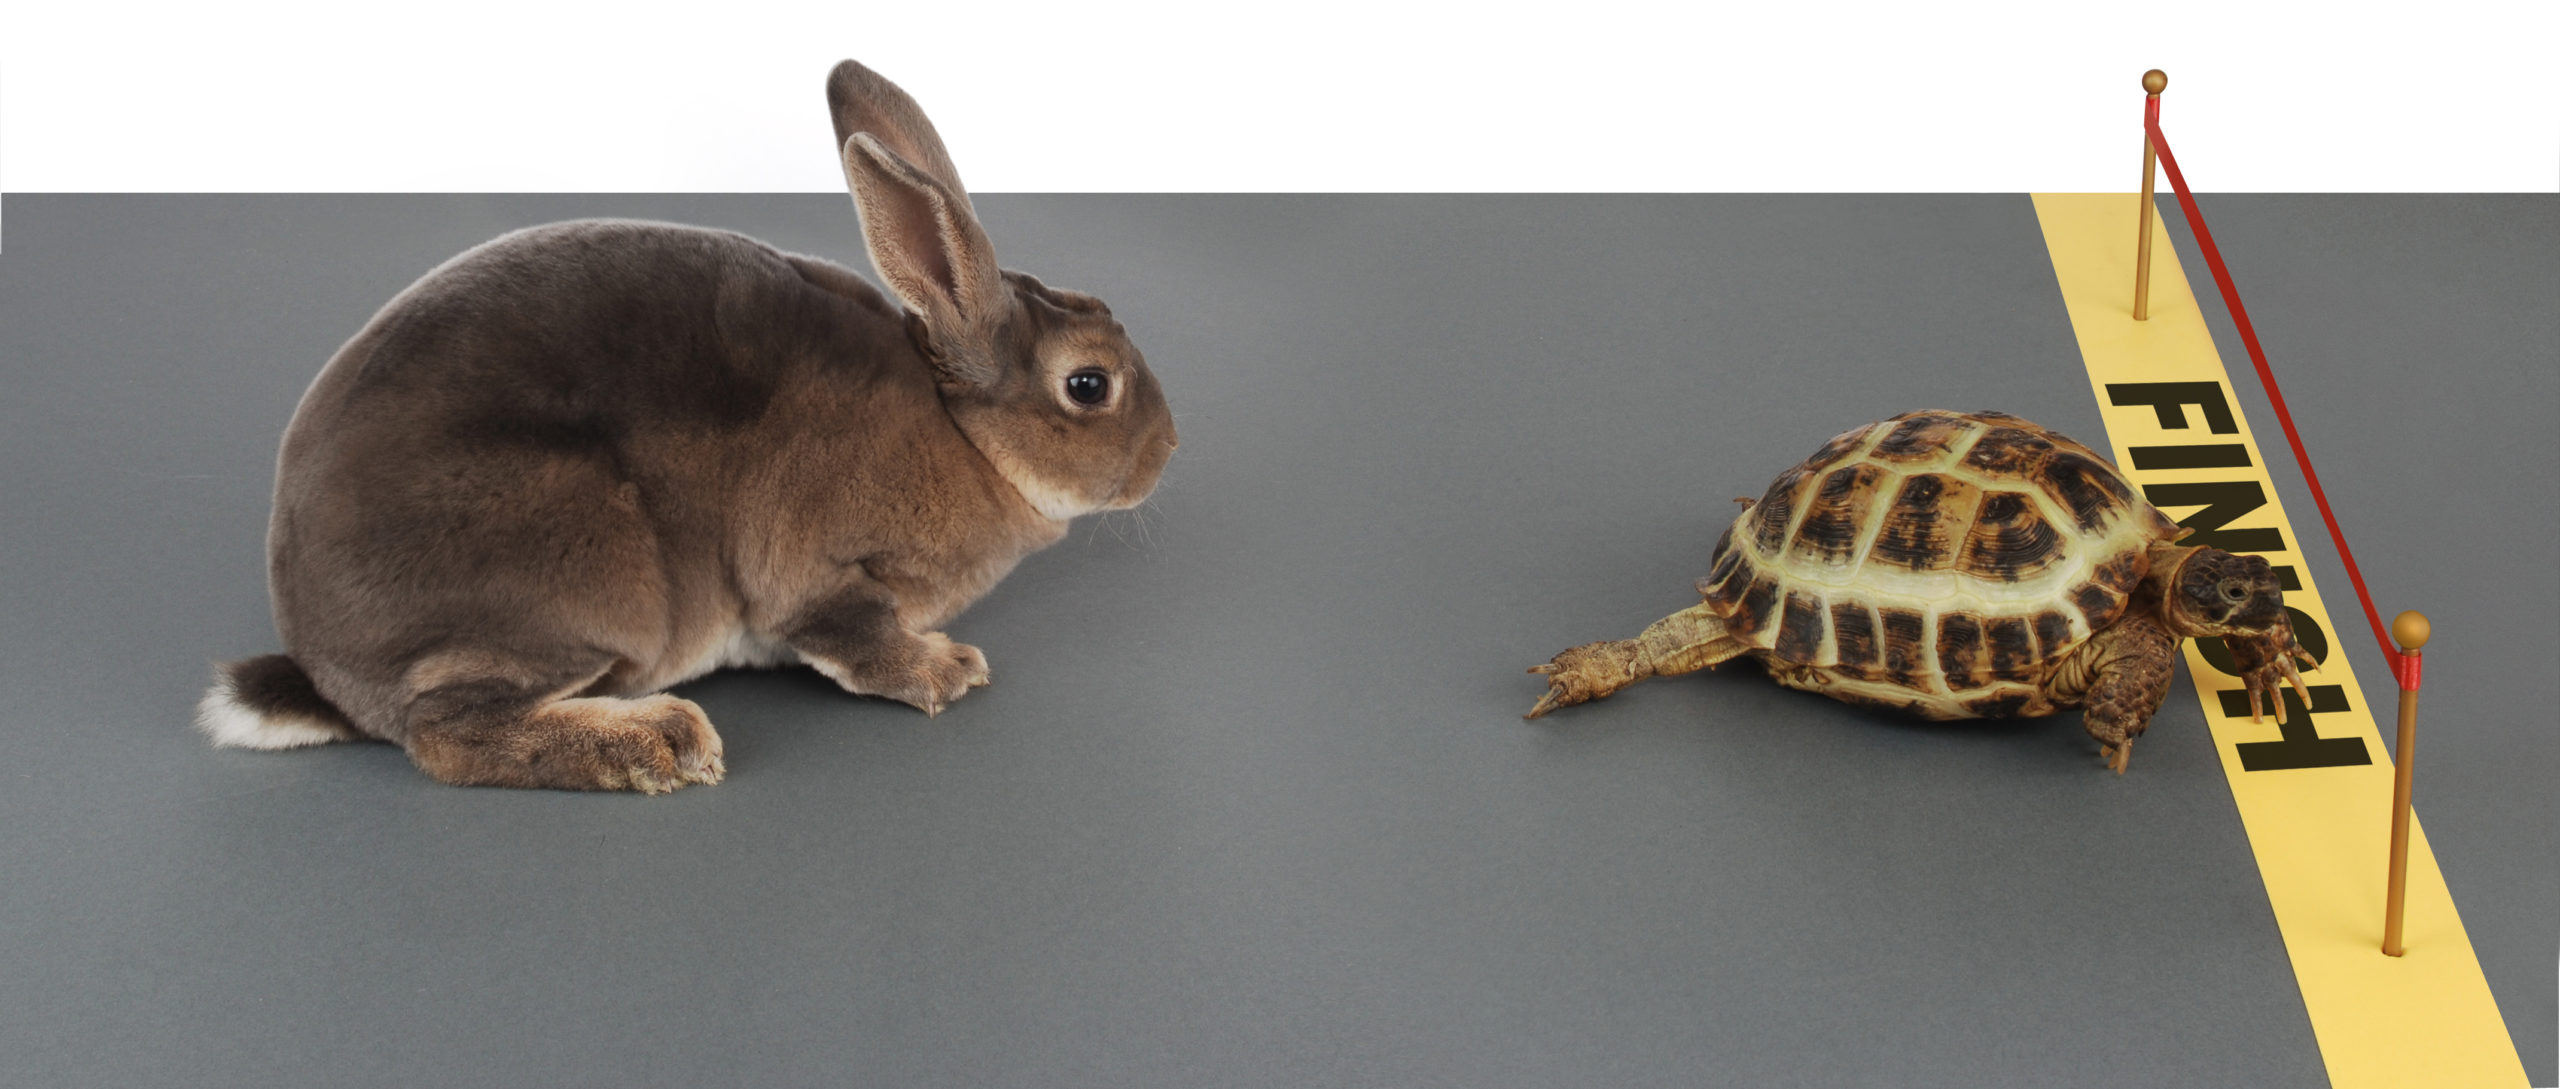 A Smorgasbord of Possibilities: How Maryland Libraries Activate Lifelong Learning for Families featuring the Tortoise and Hare